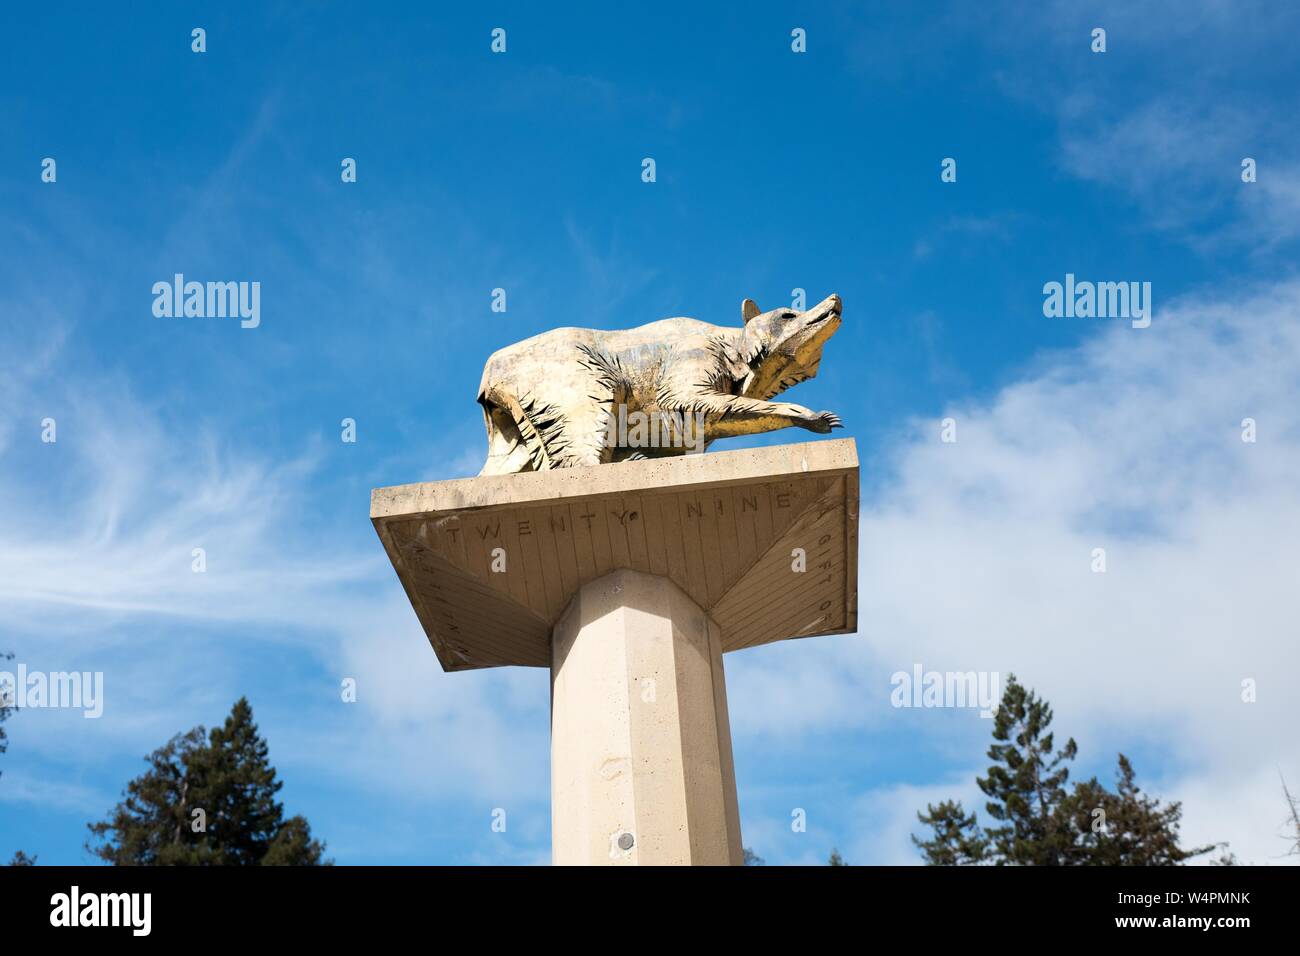 Iconic Golden Bear statue featuring the mascot of UC Berkeley, donated by the class of 1929, on the campus of UC Berkeley in Berkeley, California, October 9, 2018. () Stock Photo